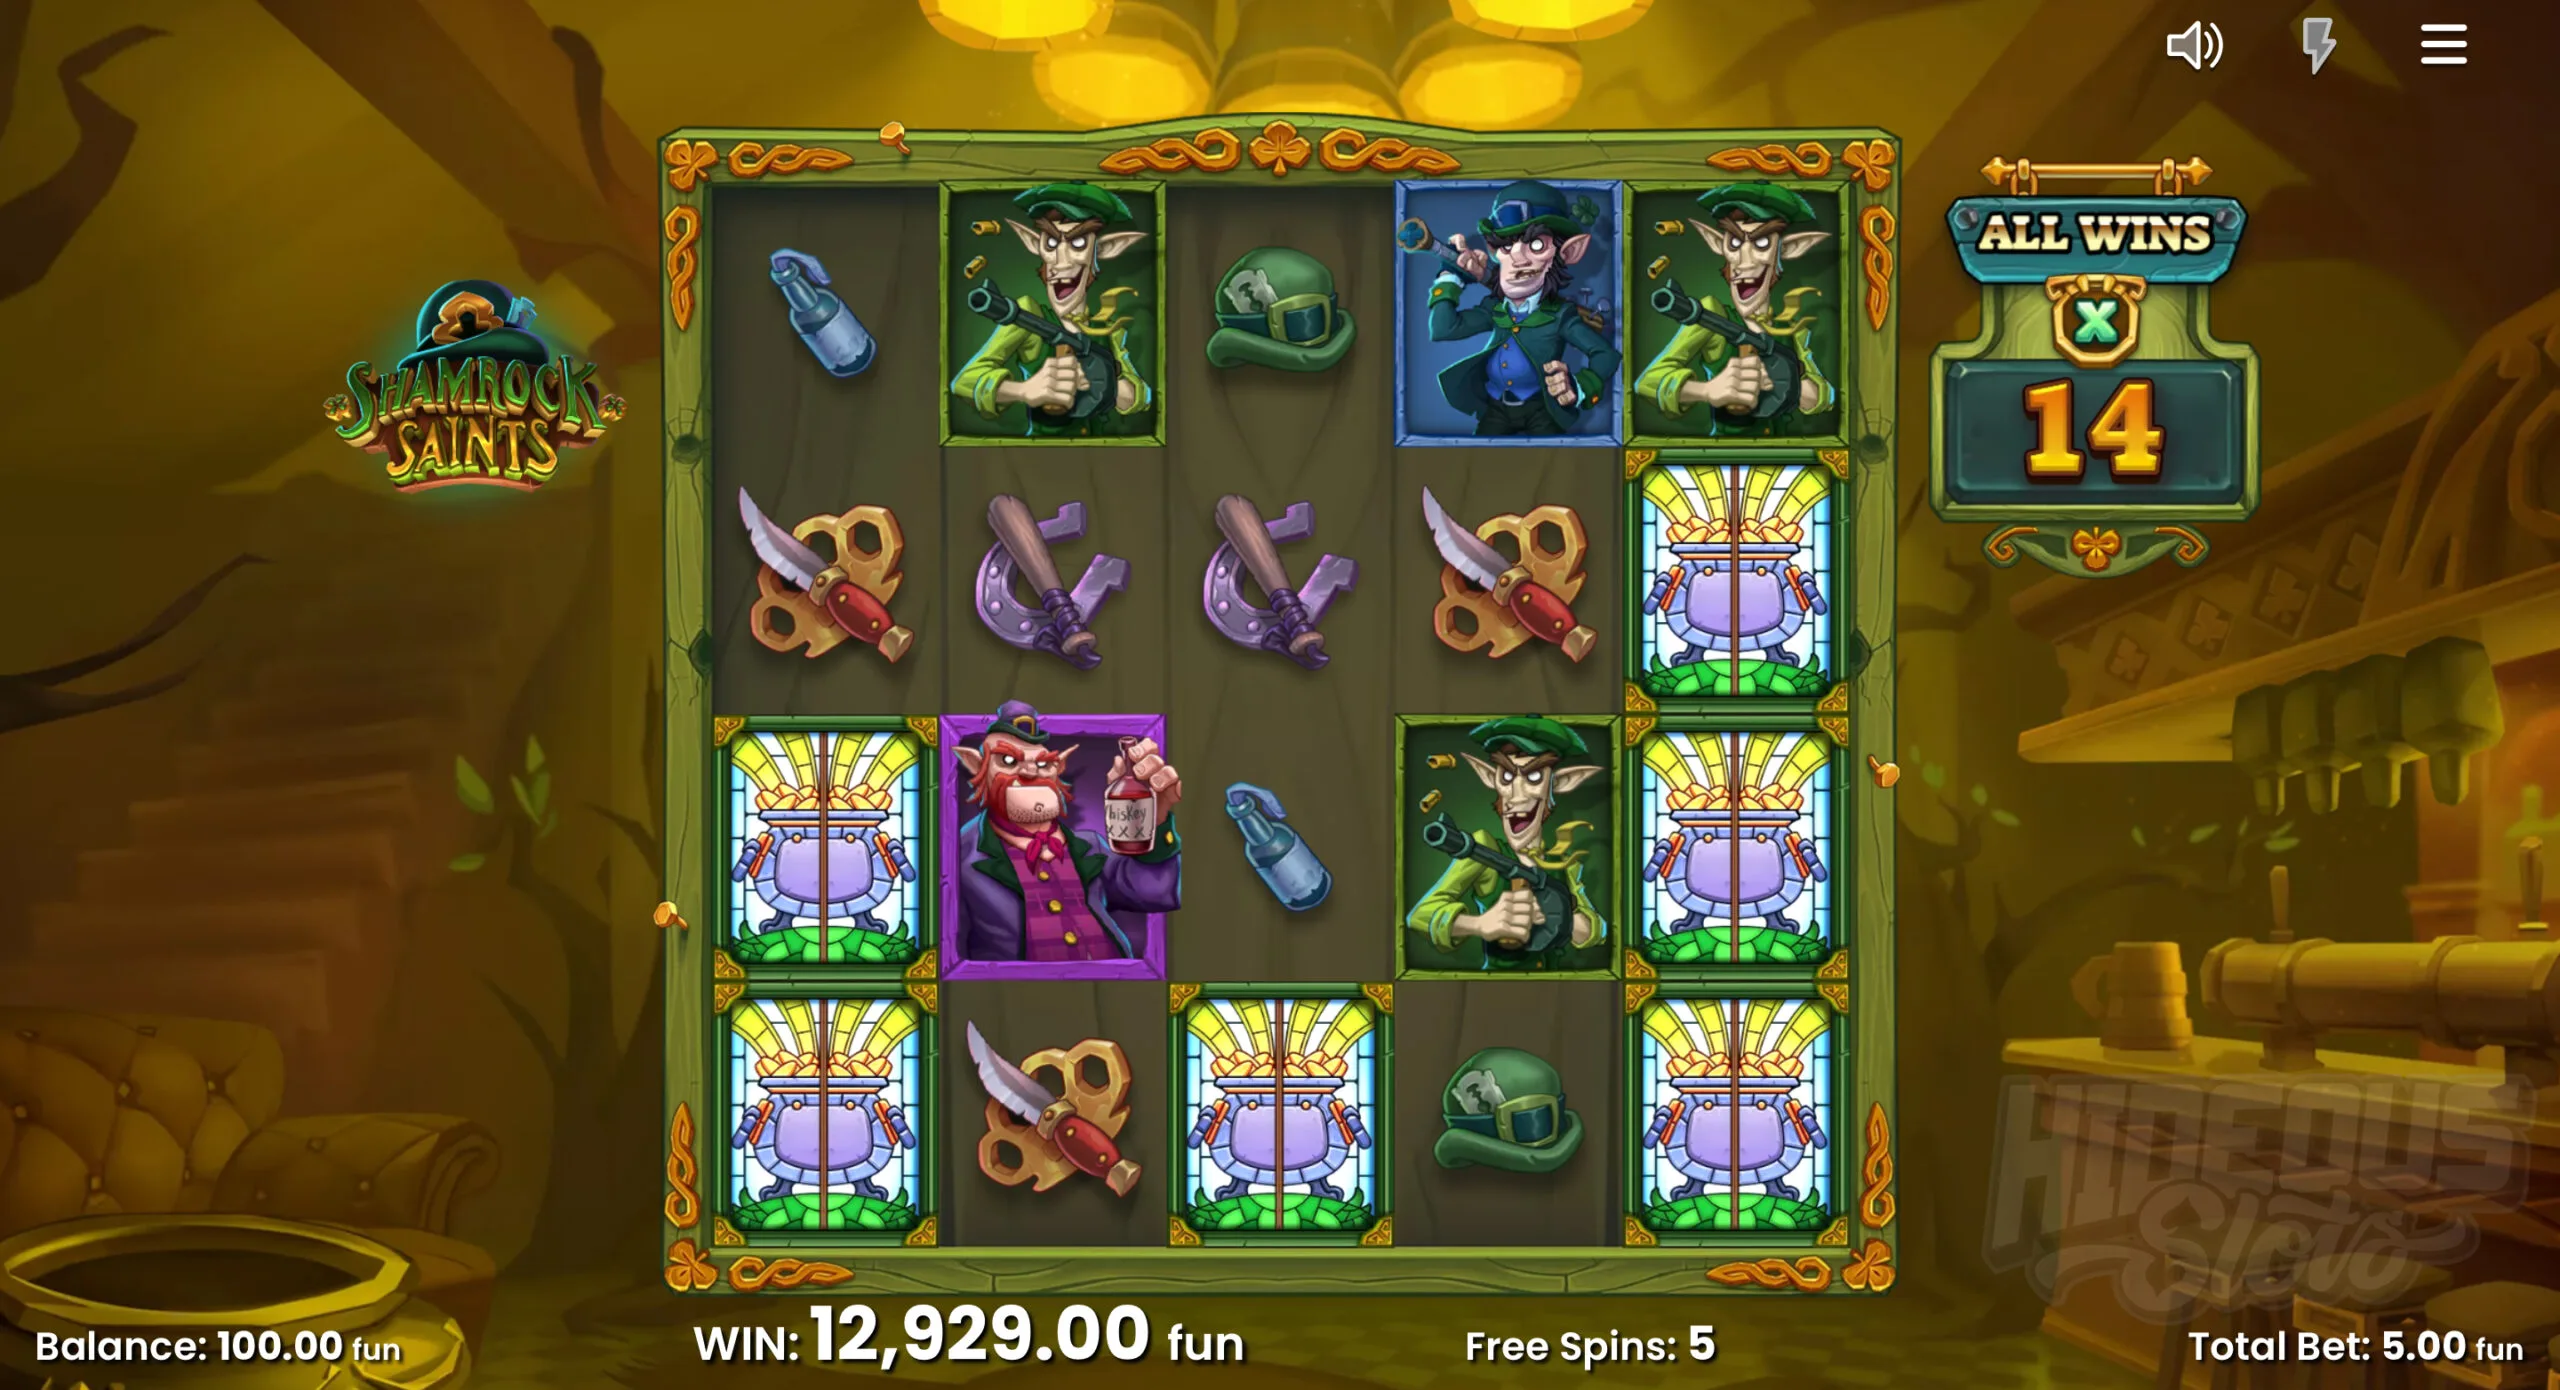 Shamrock Saints Free Spins Feature - 5 Scatters